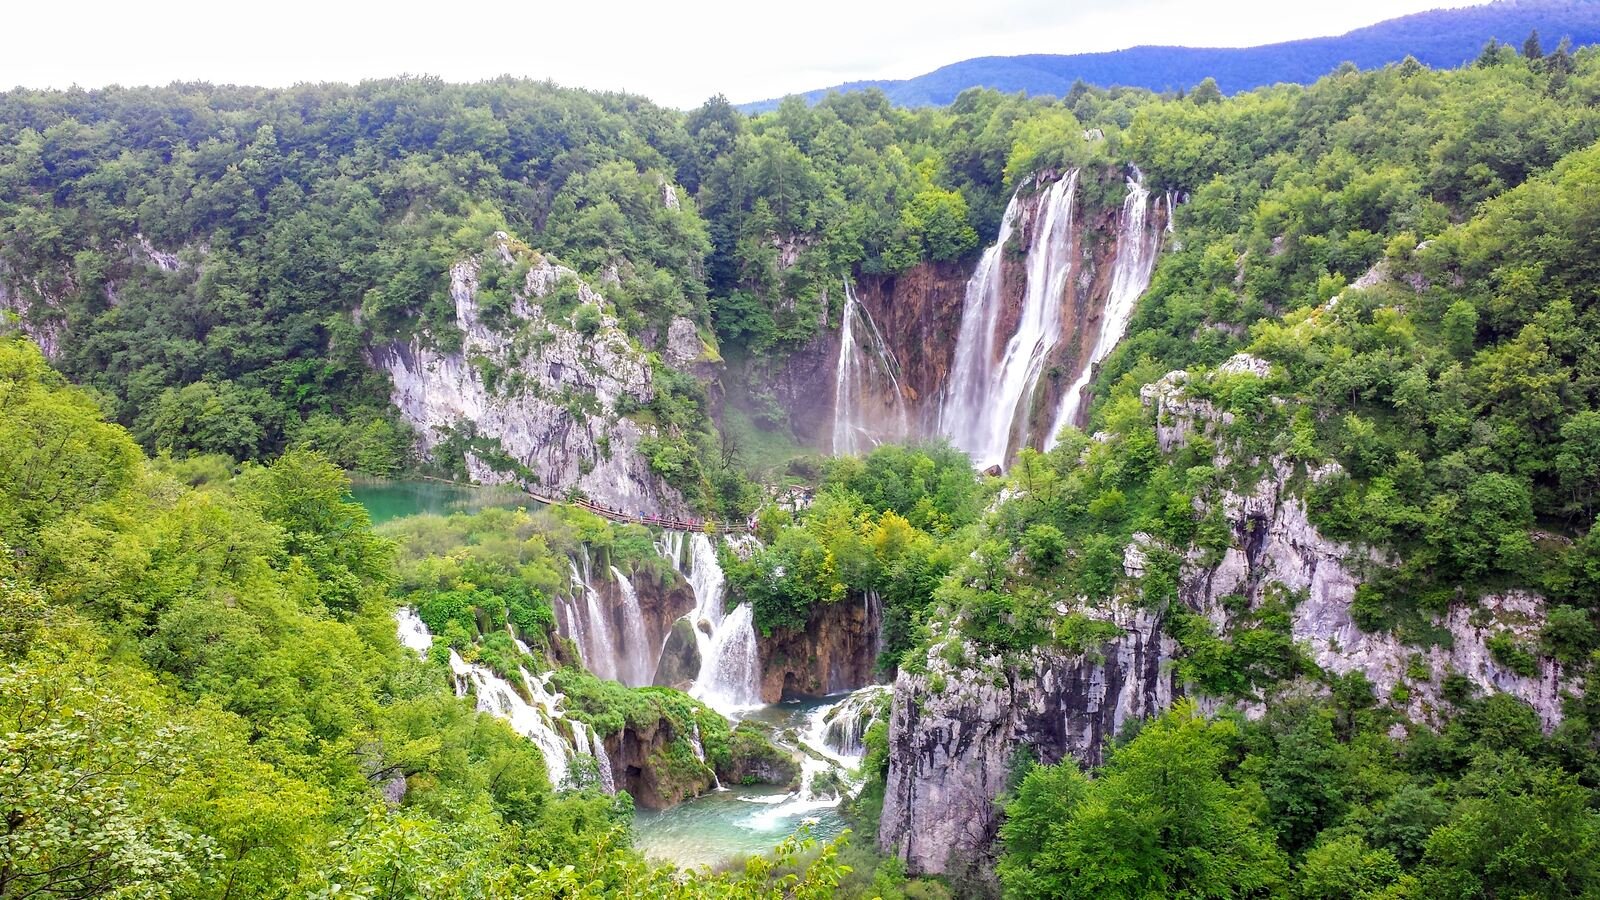 plitvice lakes and waterfall surrounded by greenery